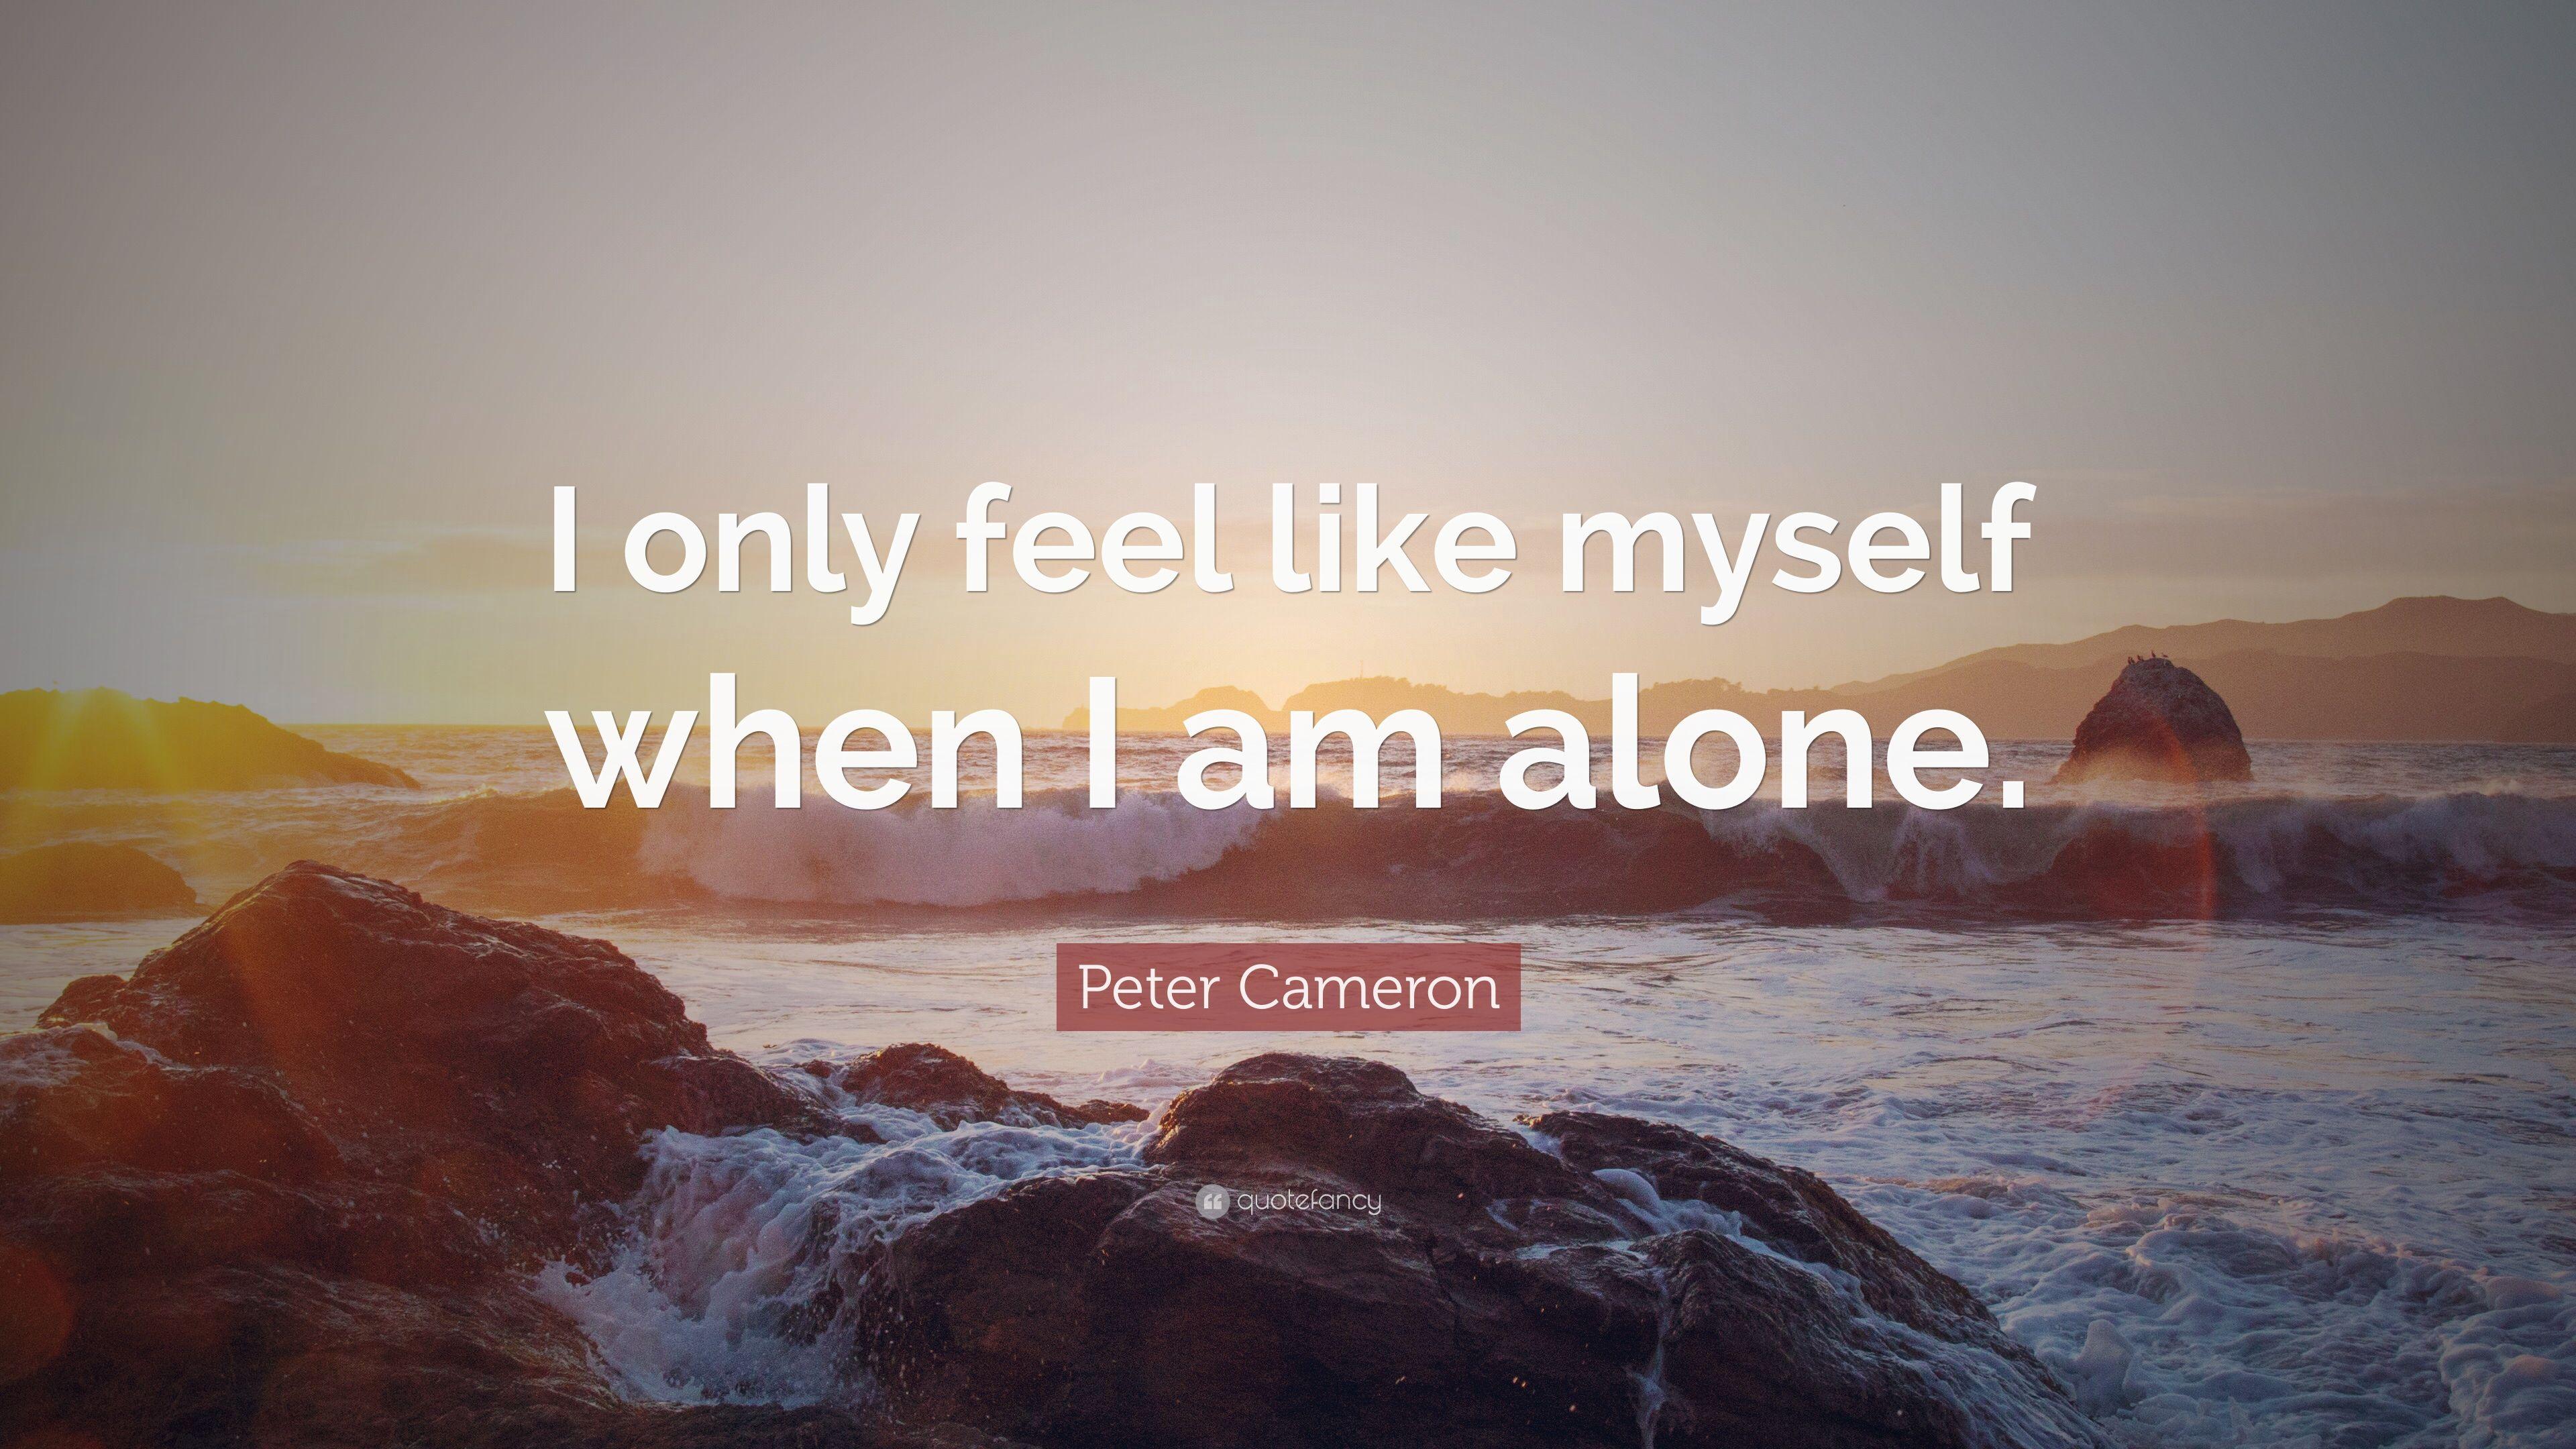 Peter Cameron Quote: “I only feel like myself when I am alone.” 12